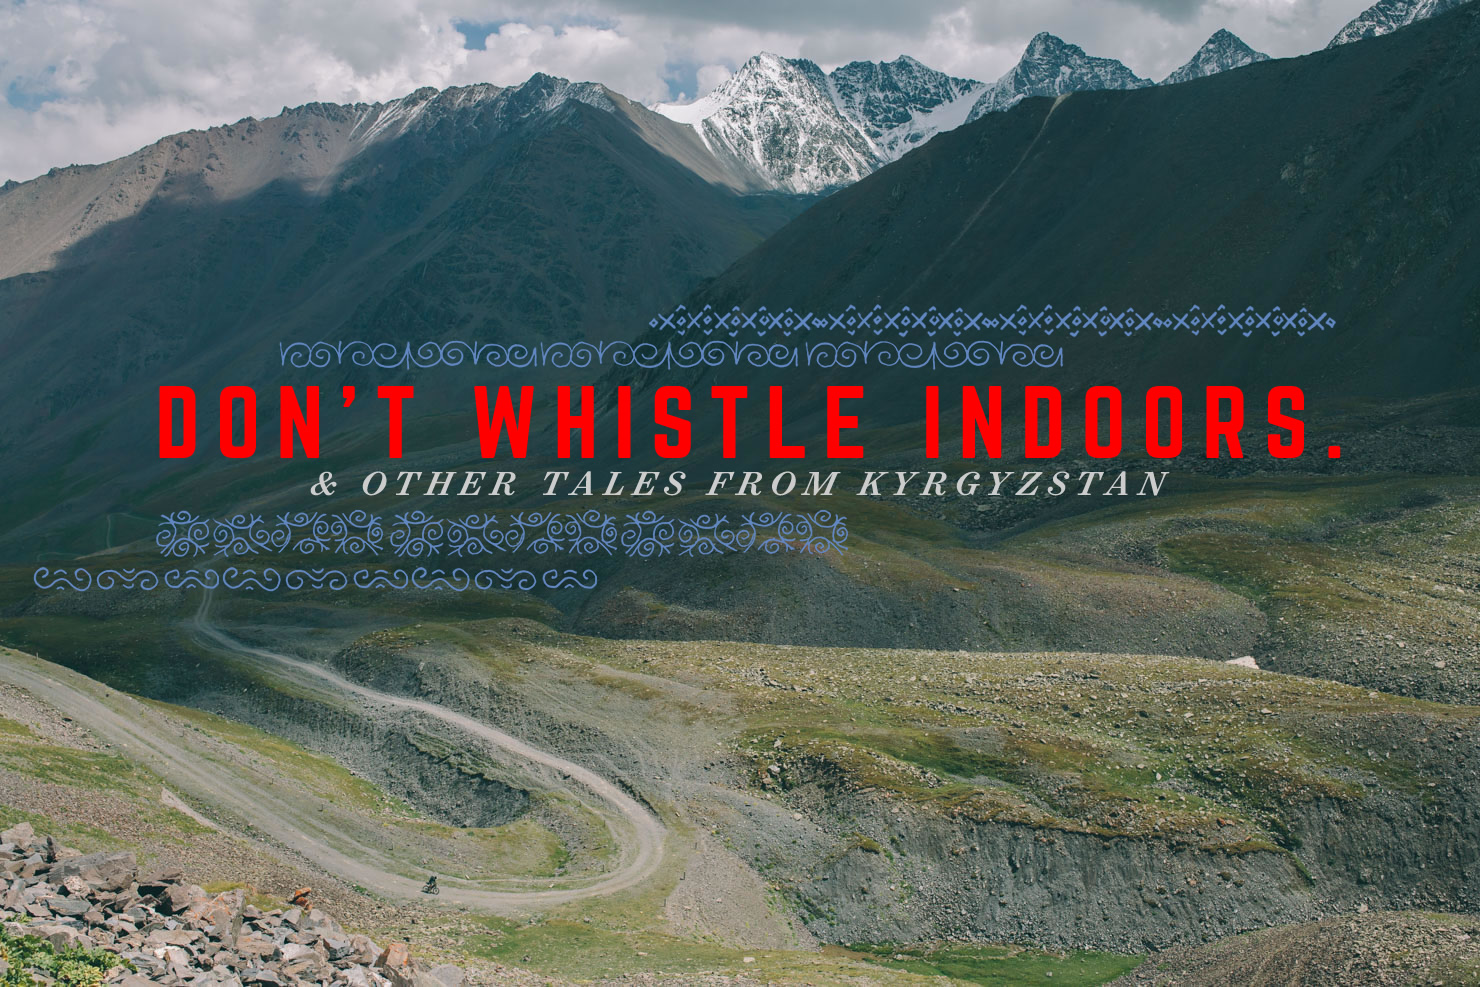 Don't Whistle Indoors, Bikepacking Kyrgyzstan